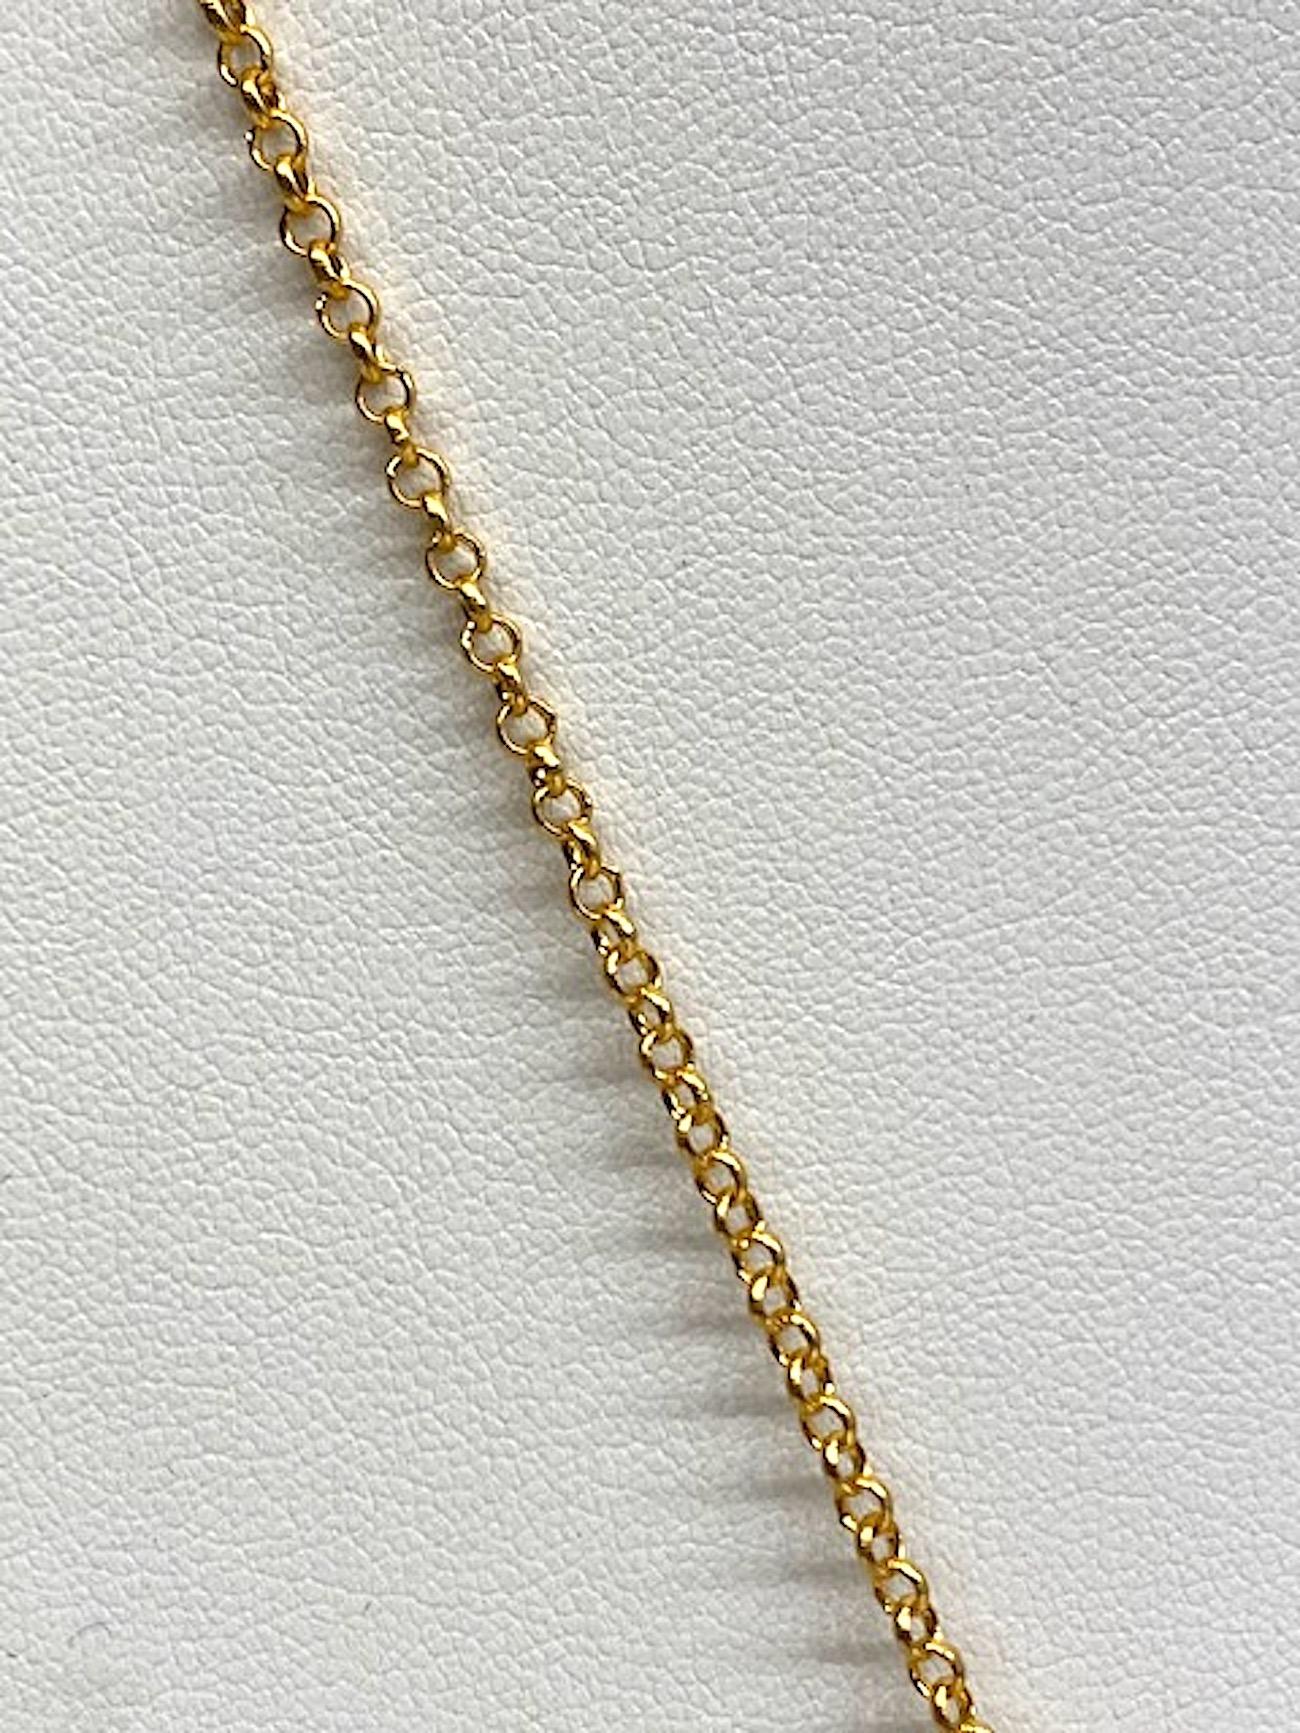 Chanel Cut Out Disk Pendant Necklace, 2019 Cruise Collection 5